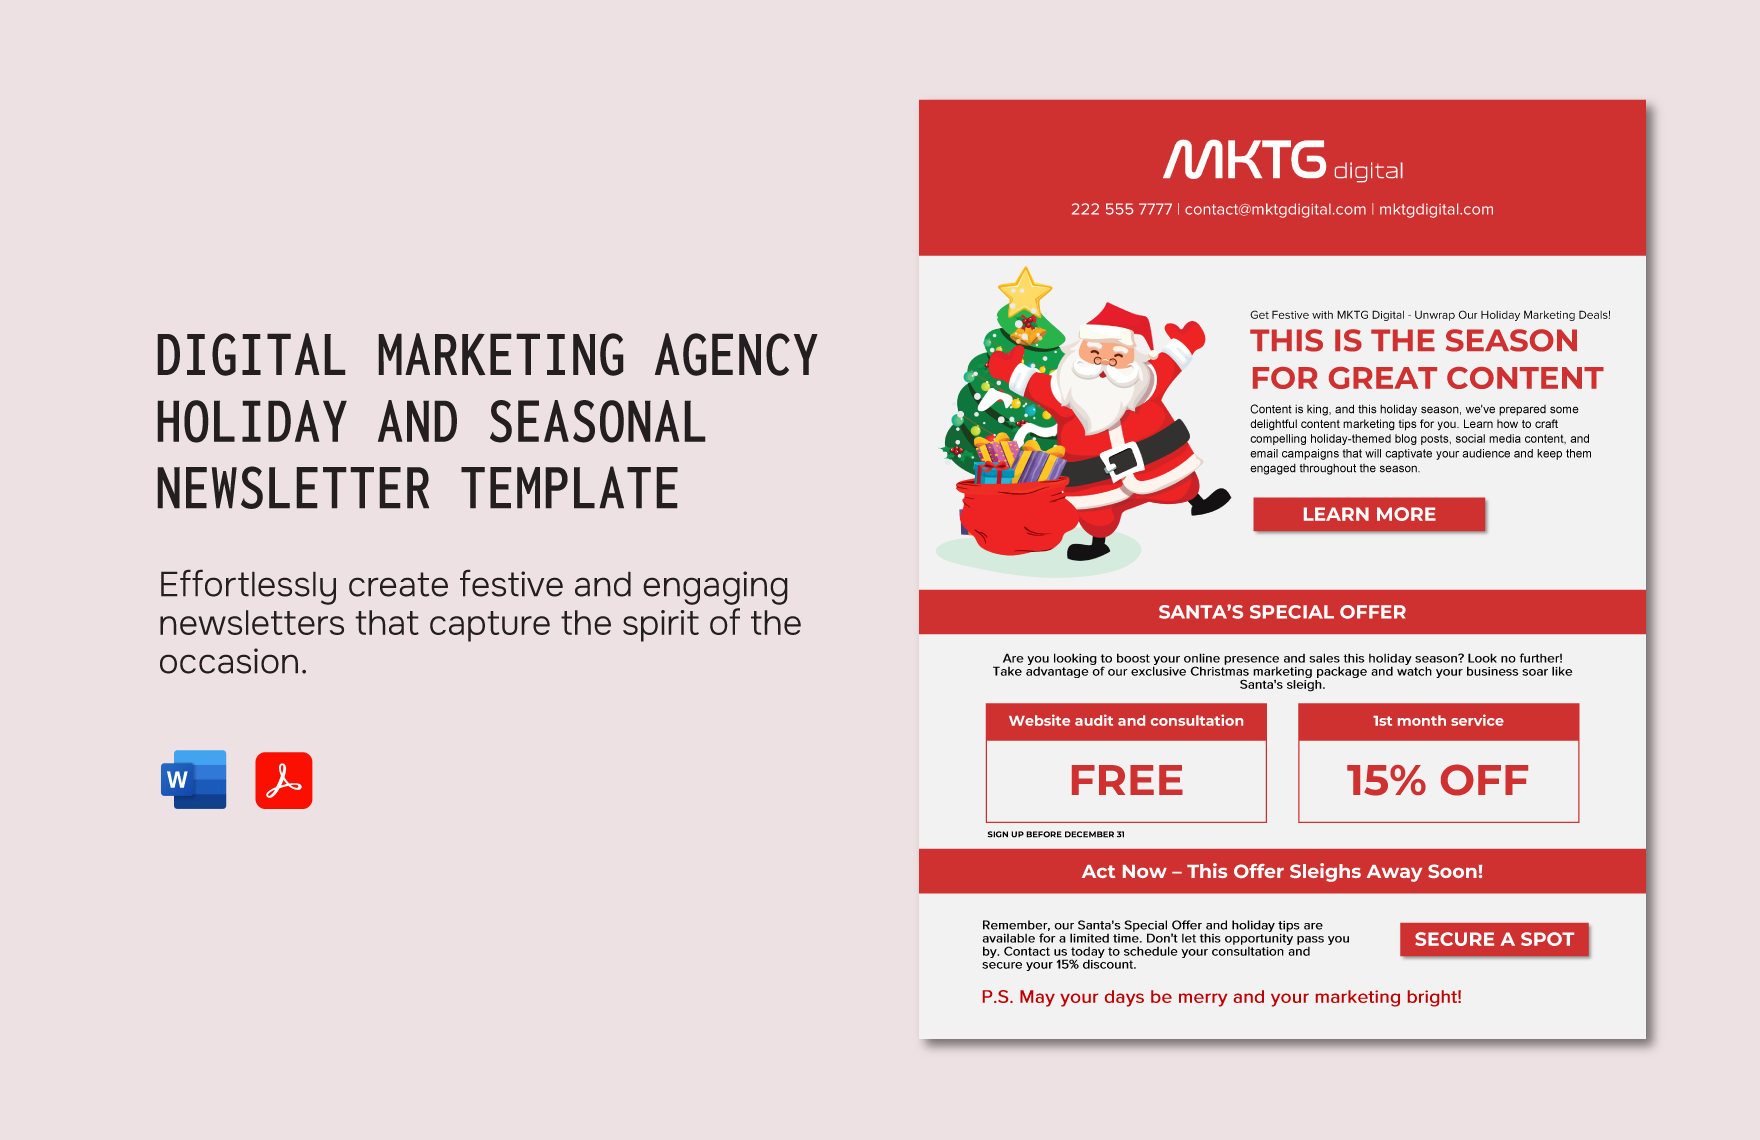 Digital Marketing Agency Holiday and Seasonal Newsletter Template in Word, PDF